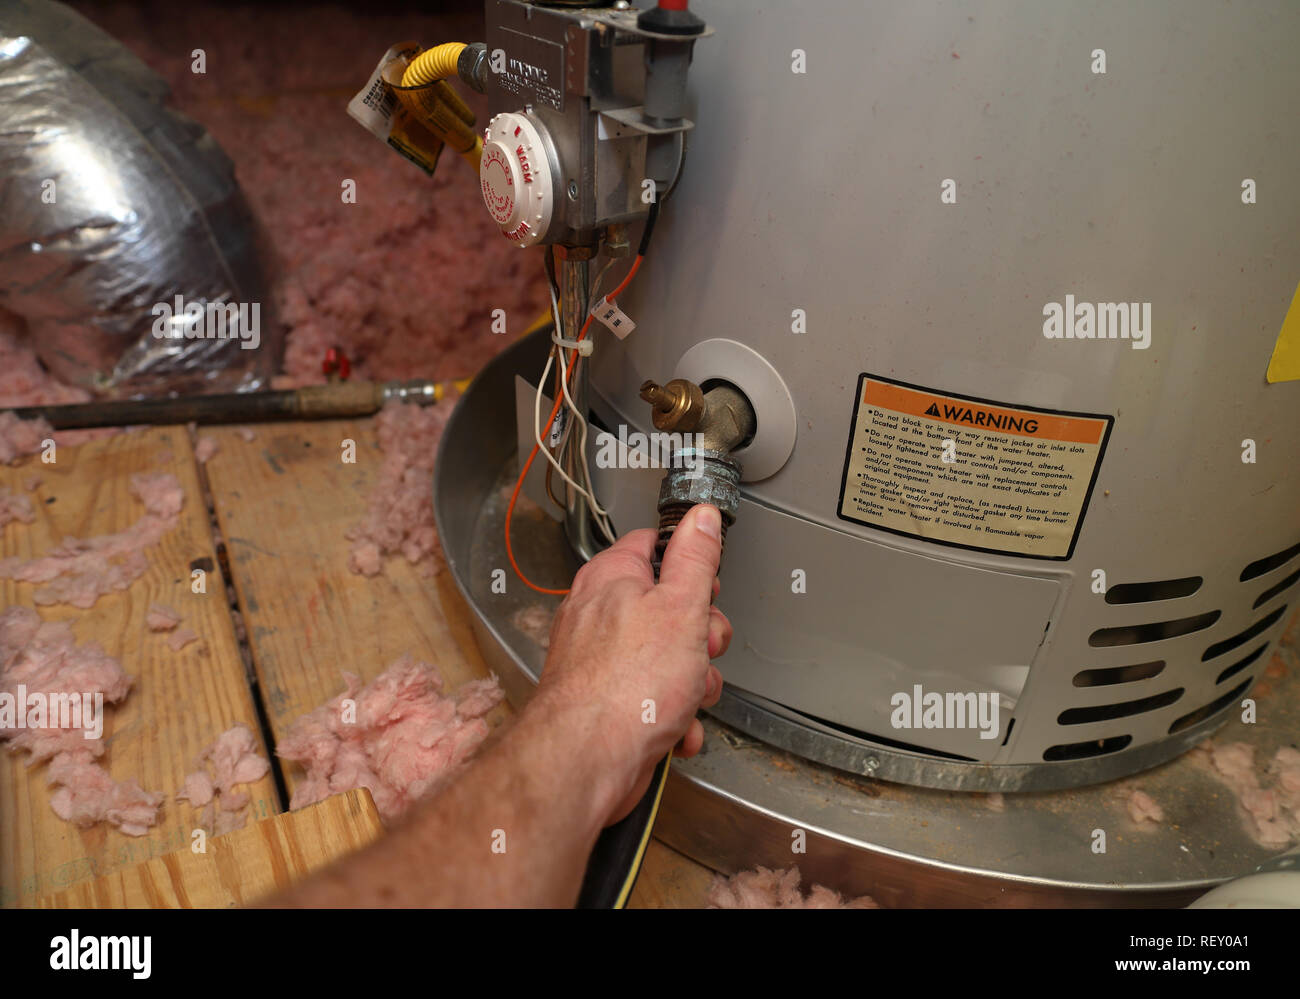 Hand attaches hose to a home water heater to perform maintenance Stock Photo